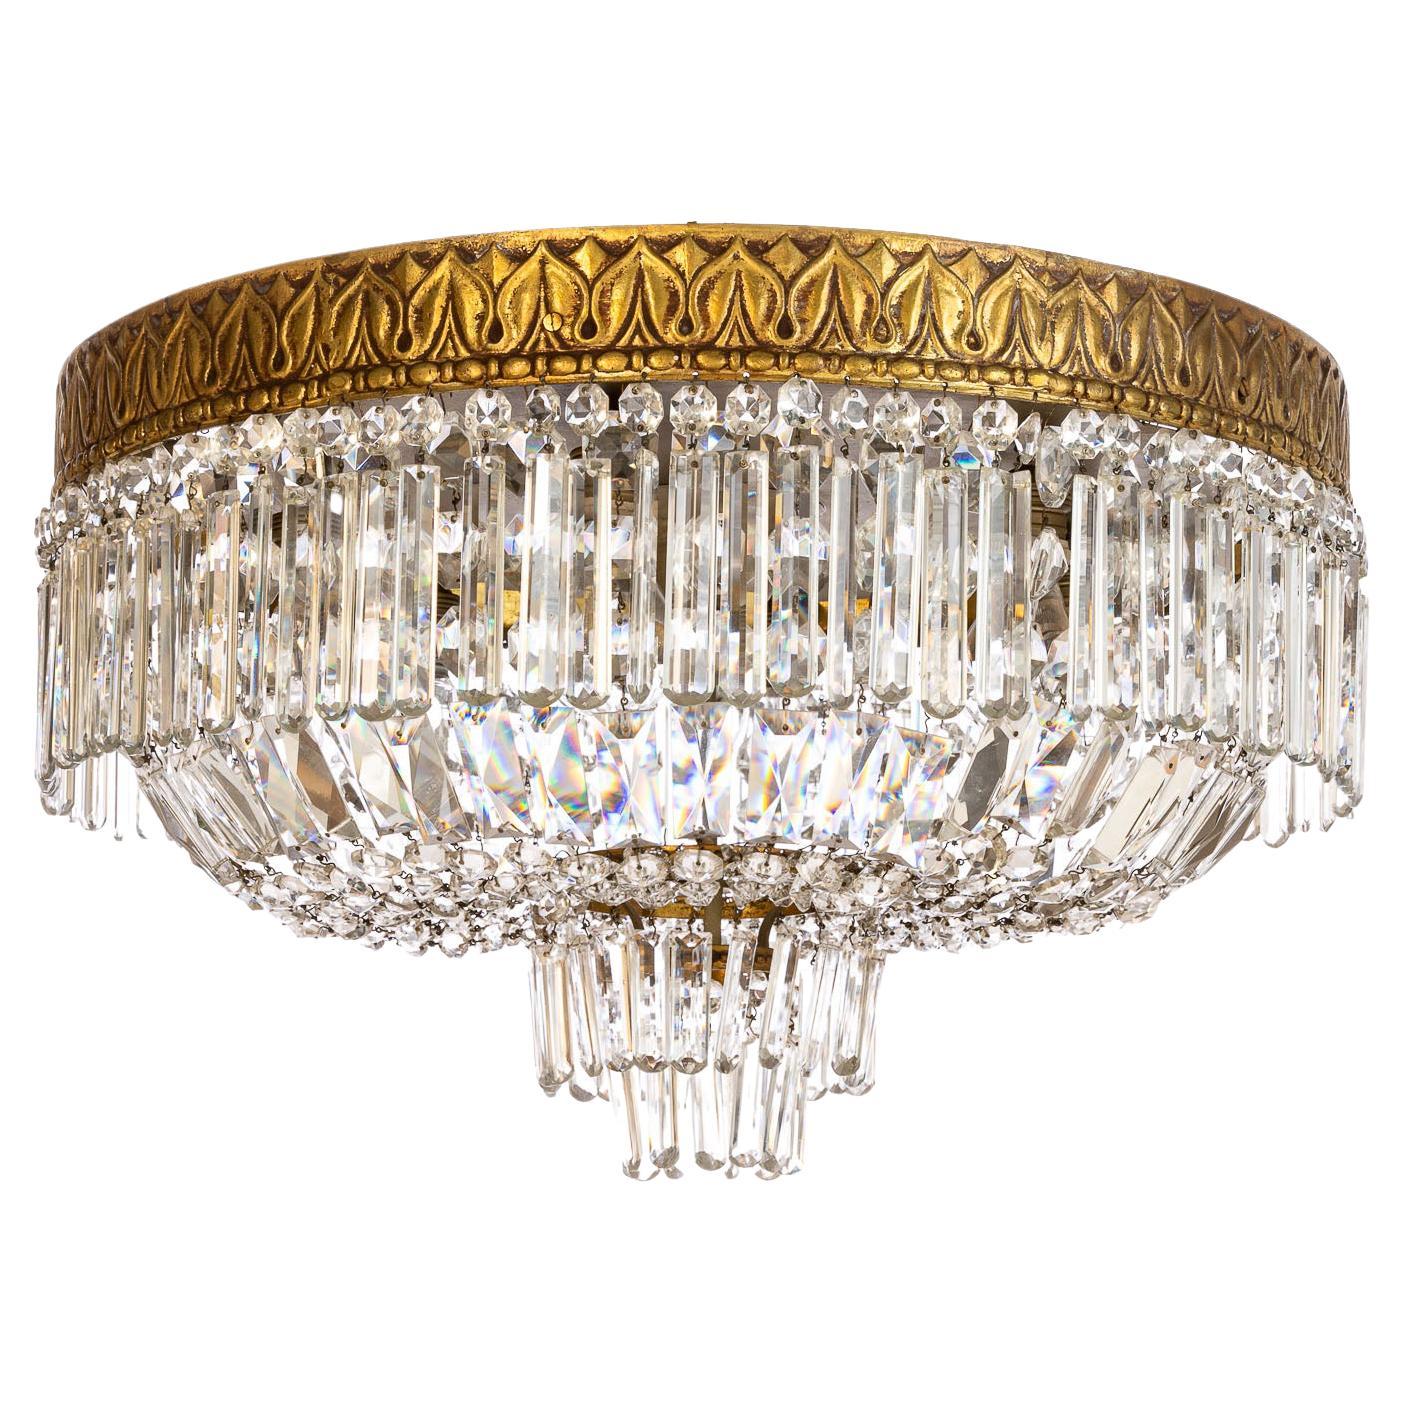 This is a truly remarkable piece. From the intricately decorated golden brass collar to the dazzling array of fine crystal glass, this lamp has that little bit of magic. Weighing in at 33 kilograms and measuring 37cm in height and 60cm across, this